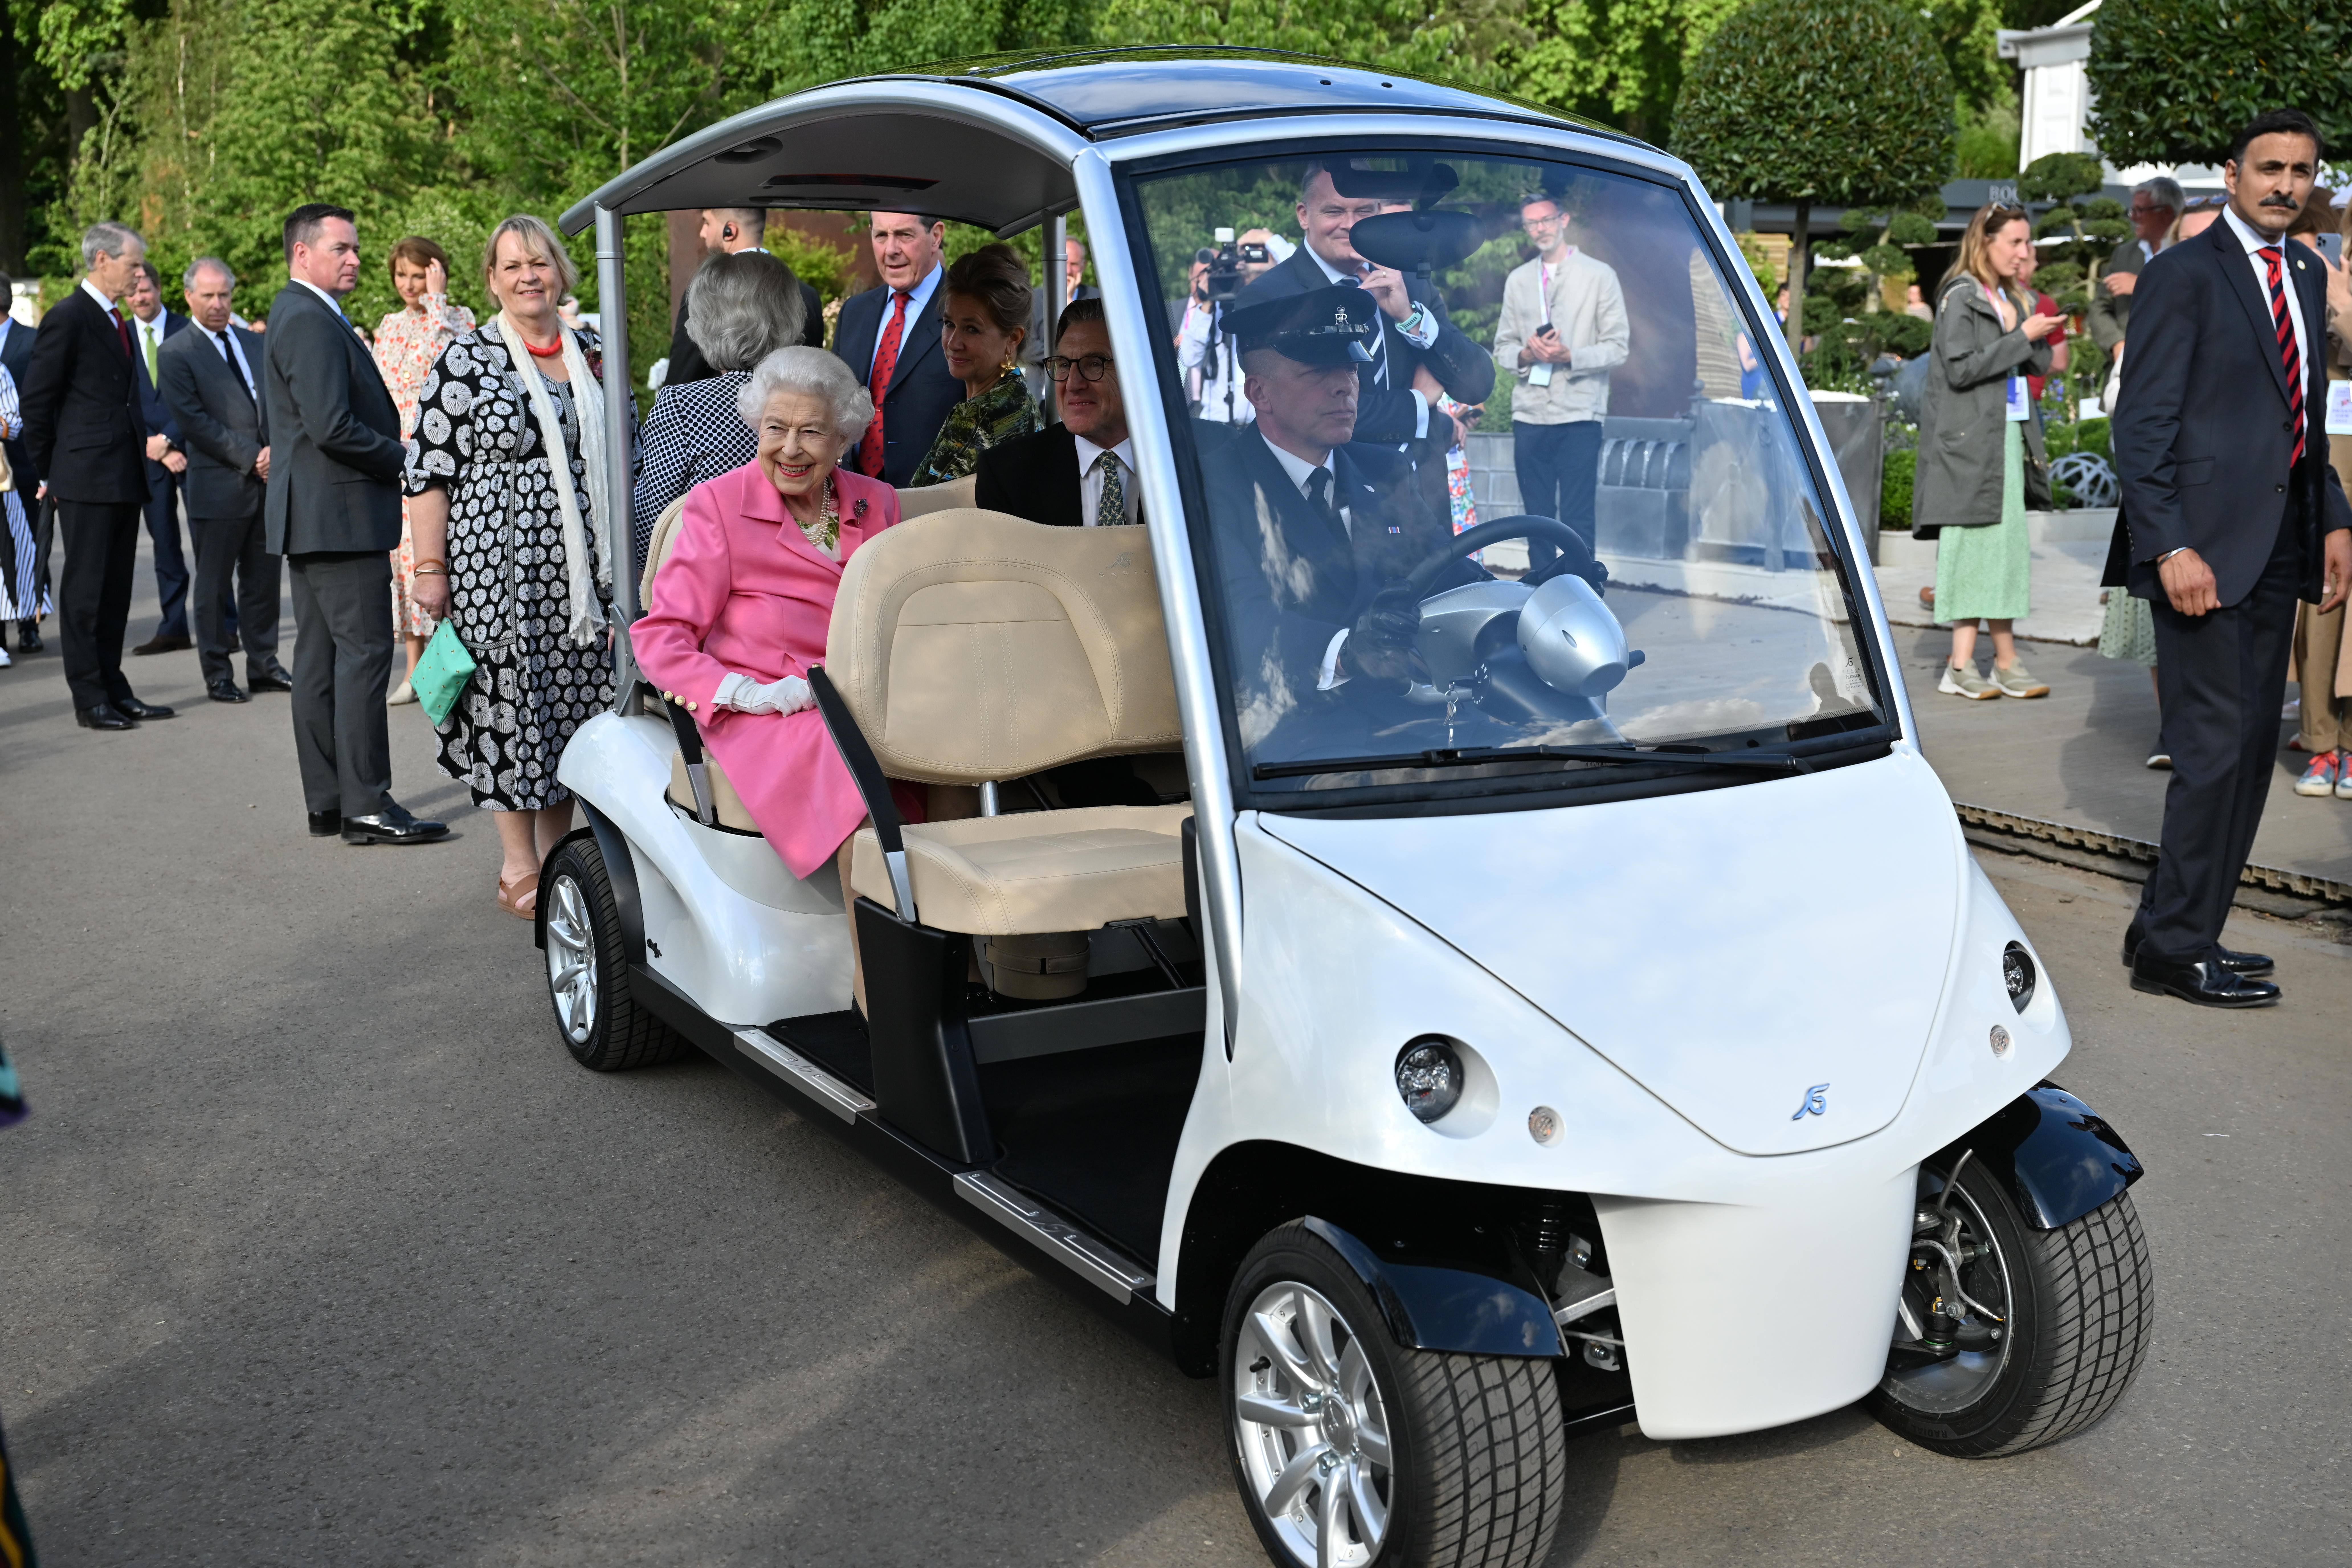 The Queenmobile: Queen uses buggy visit Flower | Independent